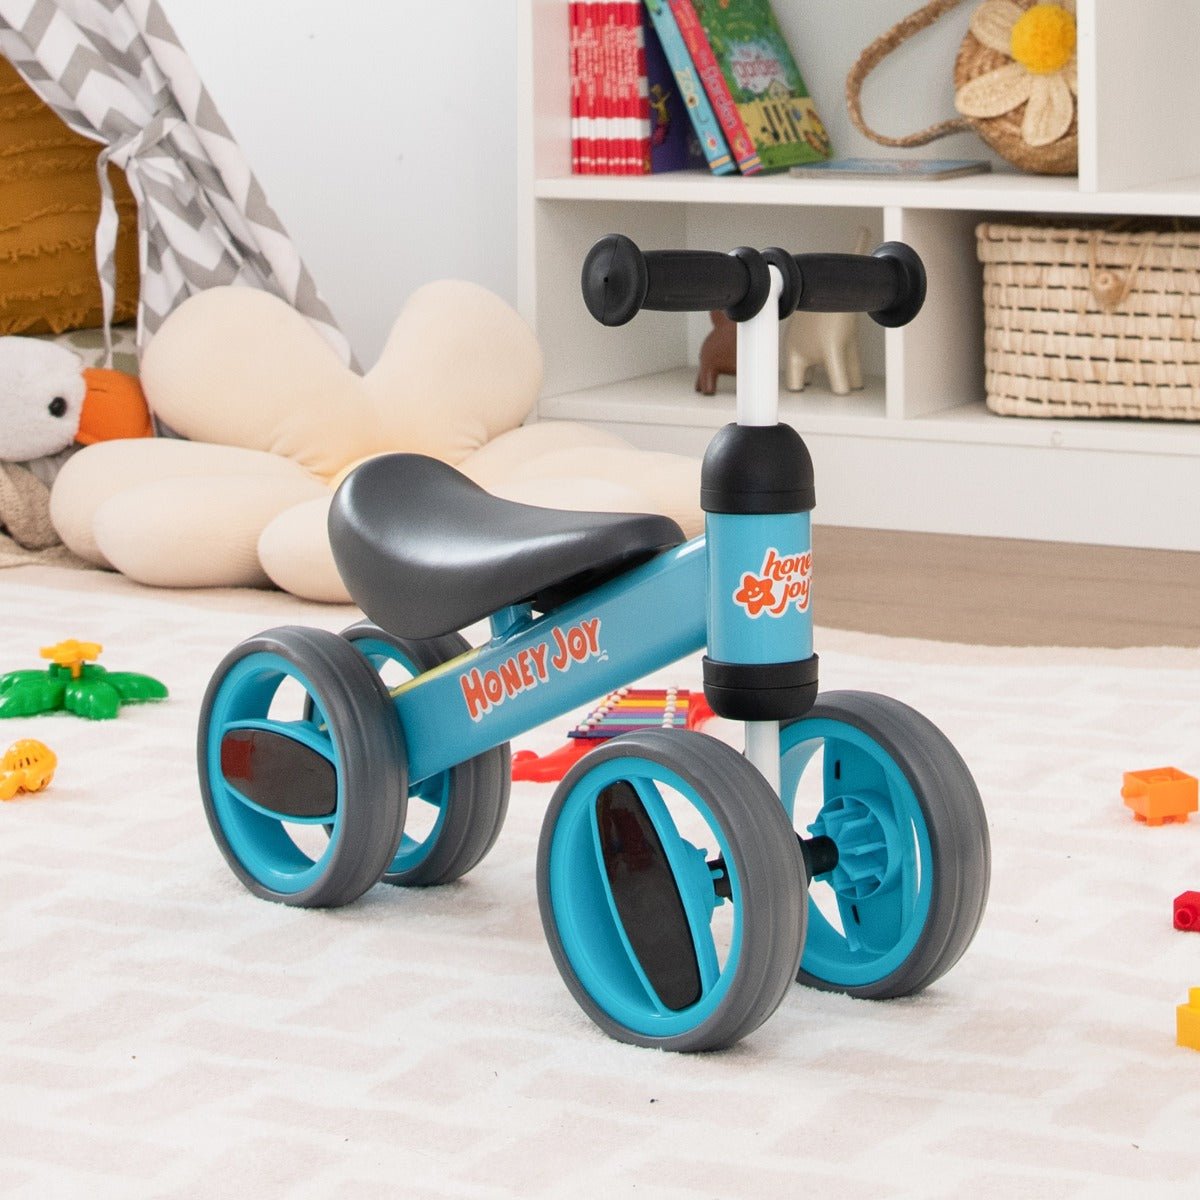 Upgrade to a Blue Baby Balance Bike - Shop Today!